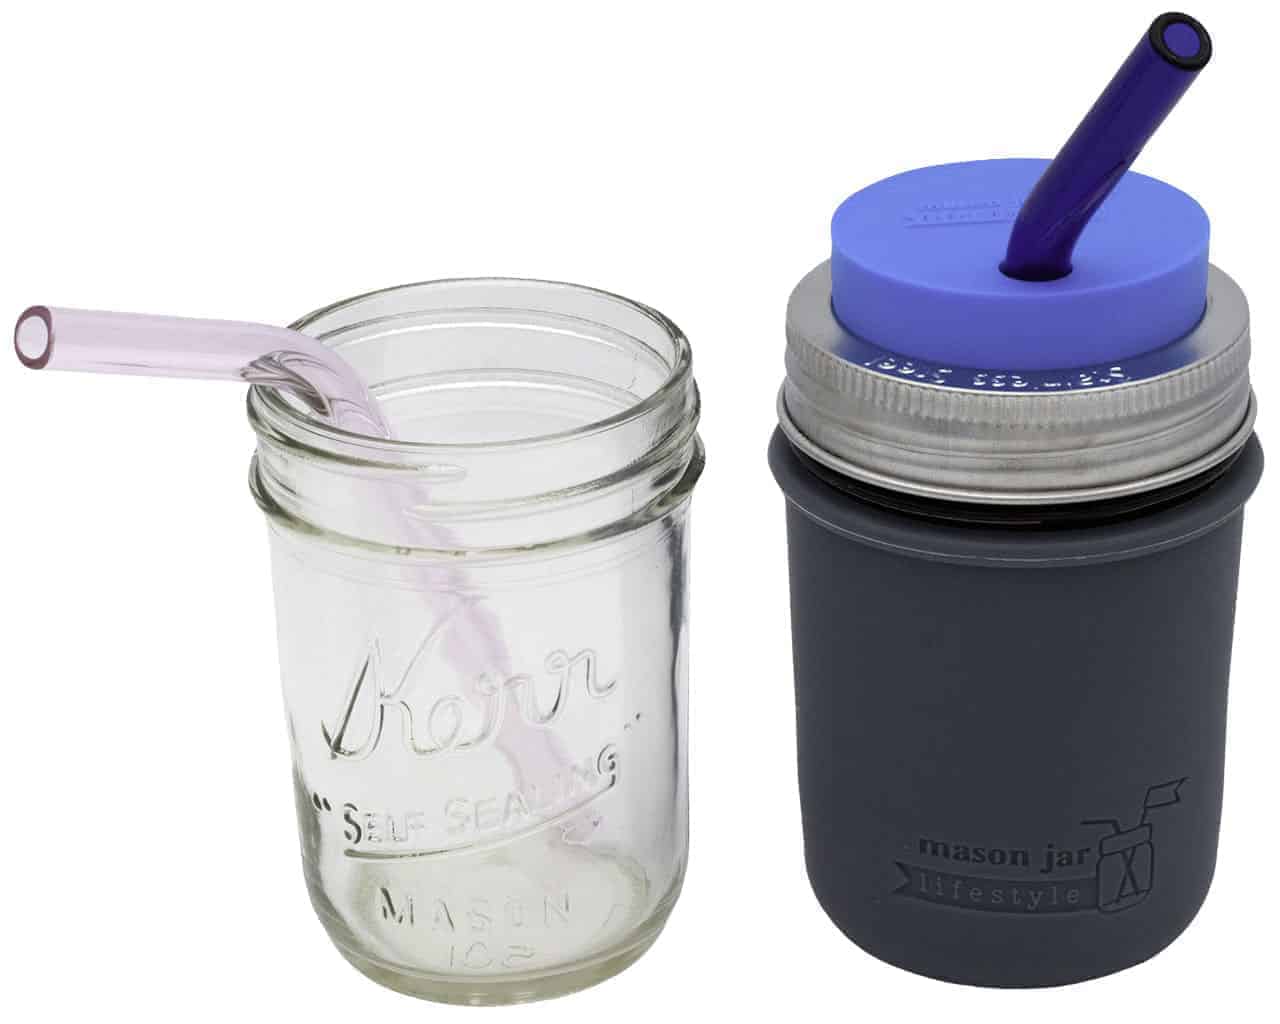 4 Pack x 16 oz Mason Jar Mugs with Handles, Lids, Reusable Straws with  Fruit Patterned Stainless Steel Lids and Straws